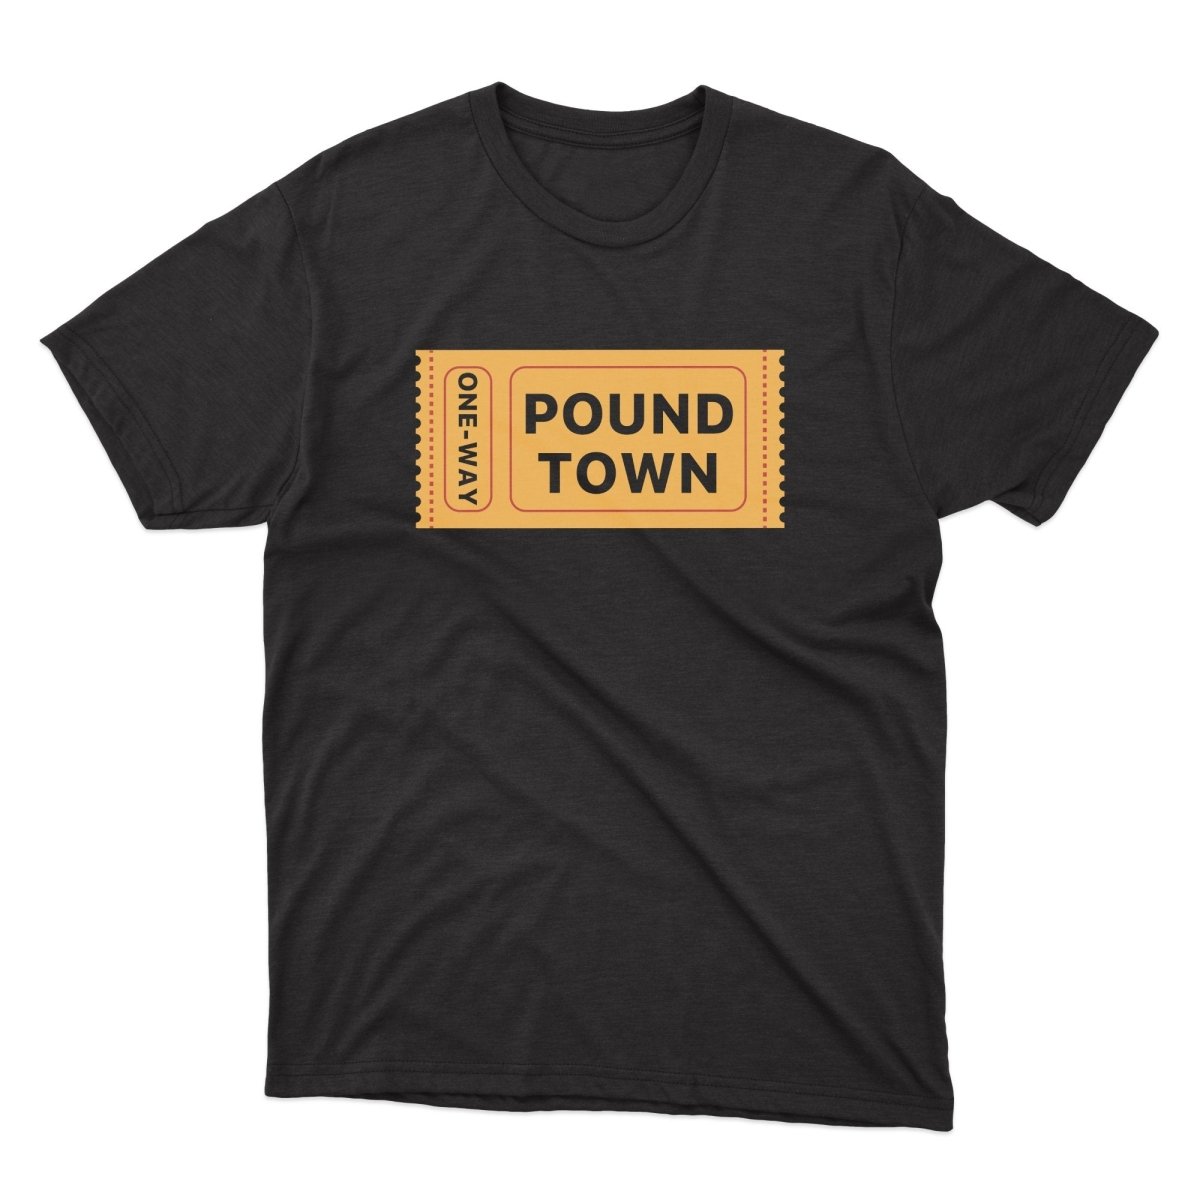 One Way Ticket To Pound Town Shirt - stickerbullOne Way Ticket To Pound Town ShirtShirtsPrintifystickerbull19266057827263318452BlackSa black t - shirt with the words pound town on it